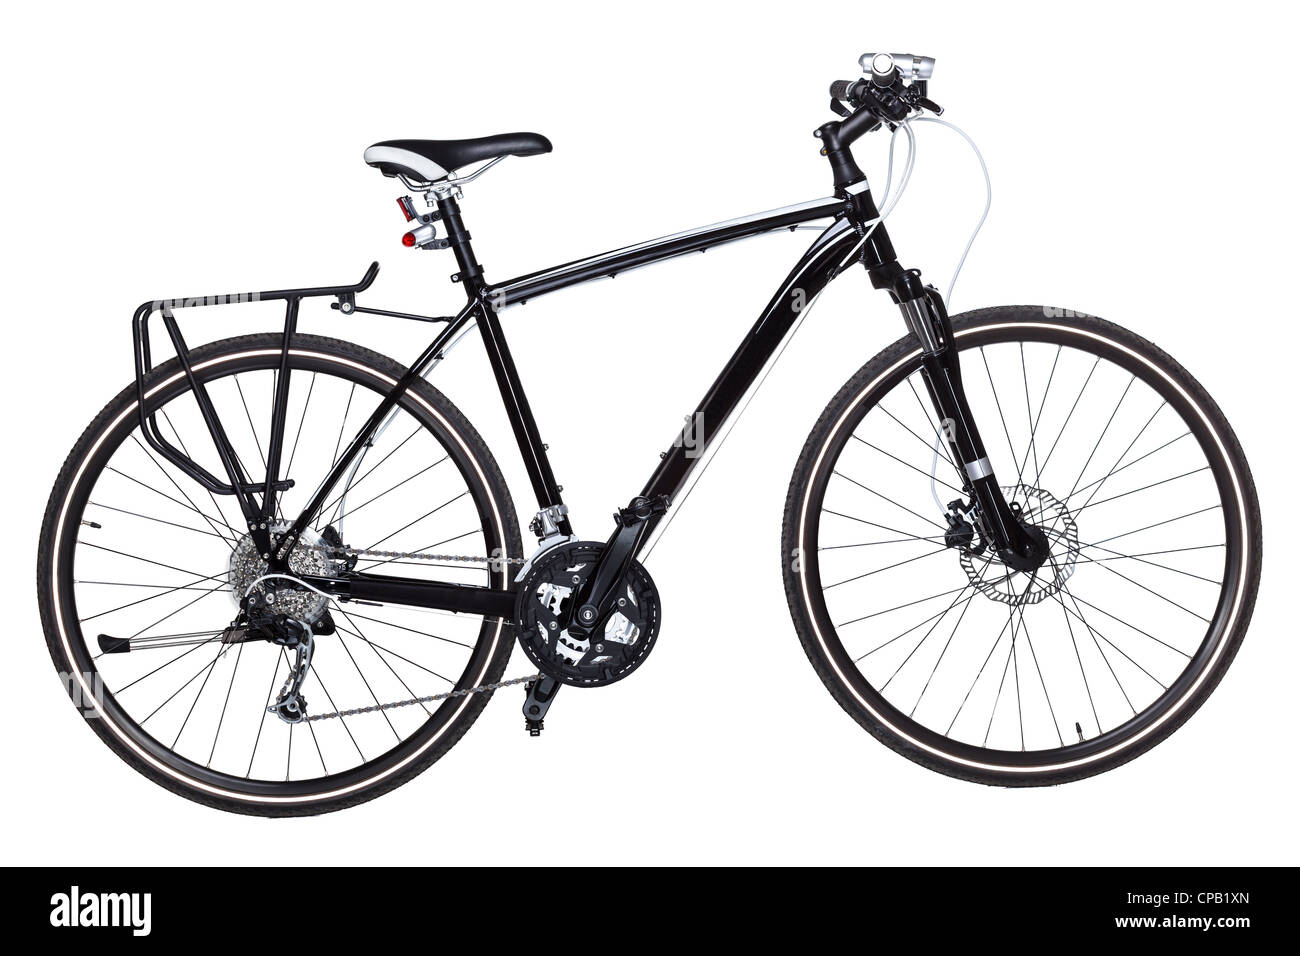 Black Mountain Bicycle isolated on white Banque D'Images